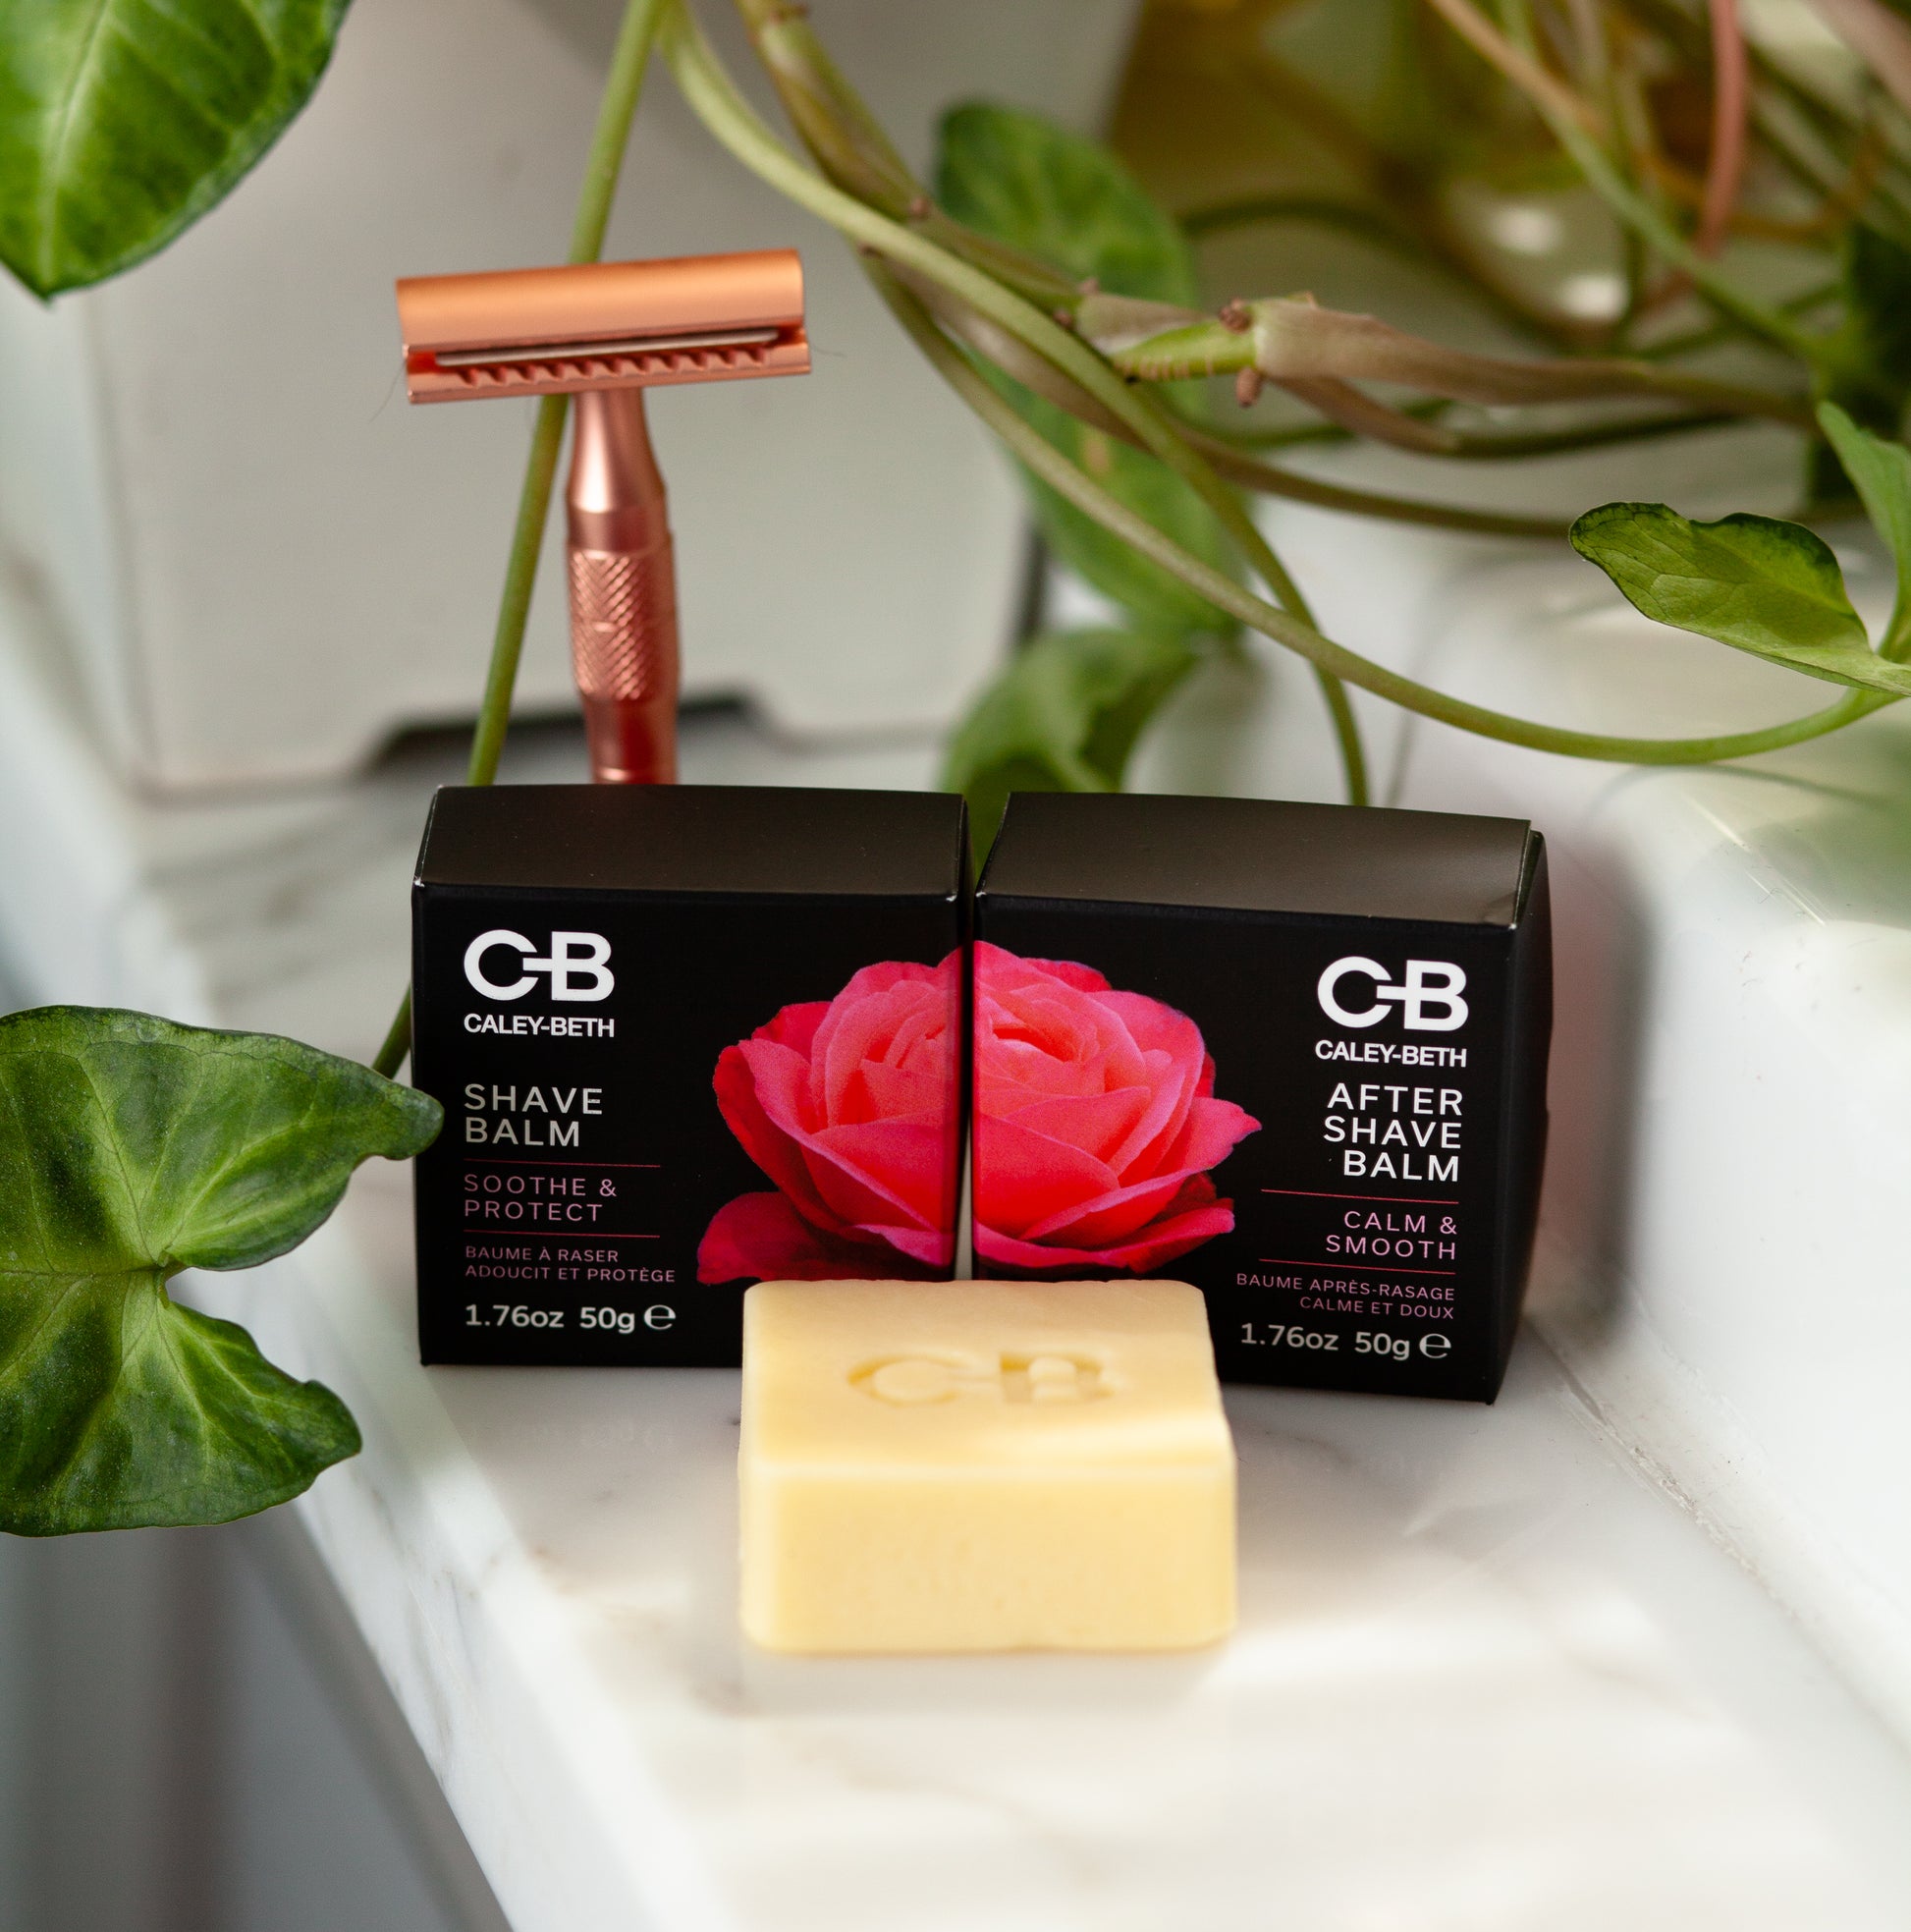 Caley-Beth sustainable skin and body care Toronto, Ontario Canada. Relieve shaving rash, pain, irritation, bumps and burn with Caley-Beth Best Shave Balm Bar and After Shave Balm Bar sustainable, eco friendly , plastic free., zero waste. shaving cream alternative for sensitive skin.